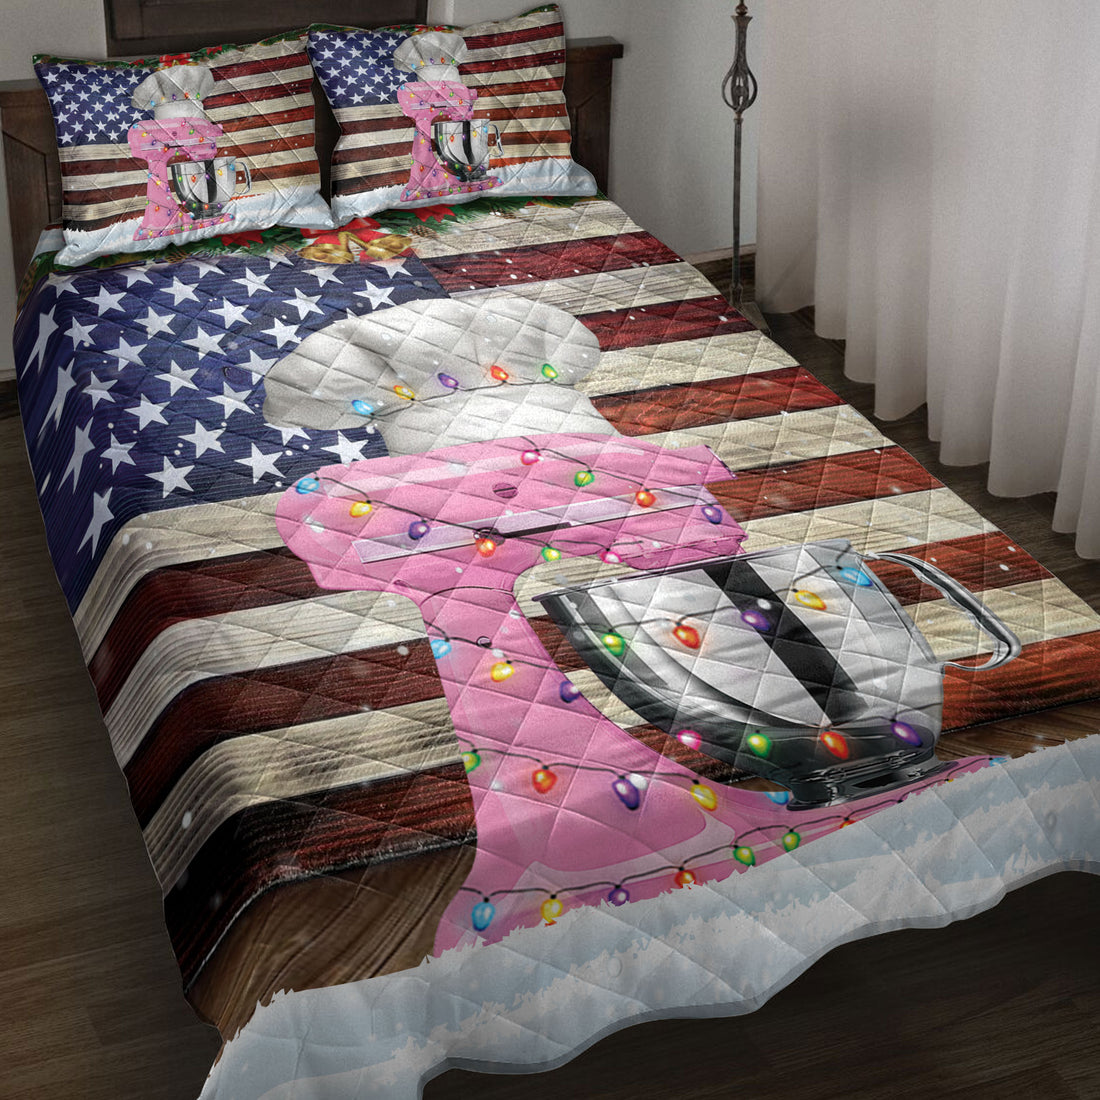 Ohaprints-Quilt-Bed-Set-Pillowcase-Stand-Baking-Mixer-With-String-Lights-American-Flag-Baker-Gift-Blanket-Bedspread-Bedding-4116-Throw (55'' x 60'')